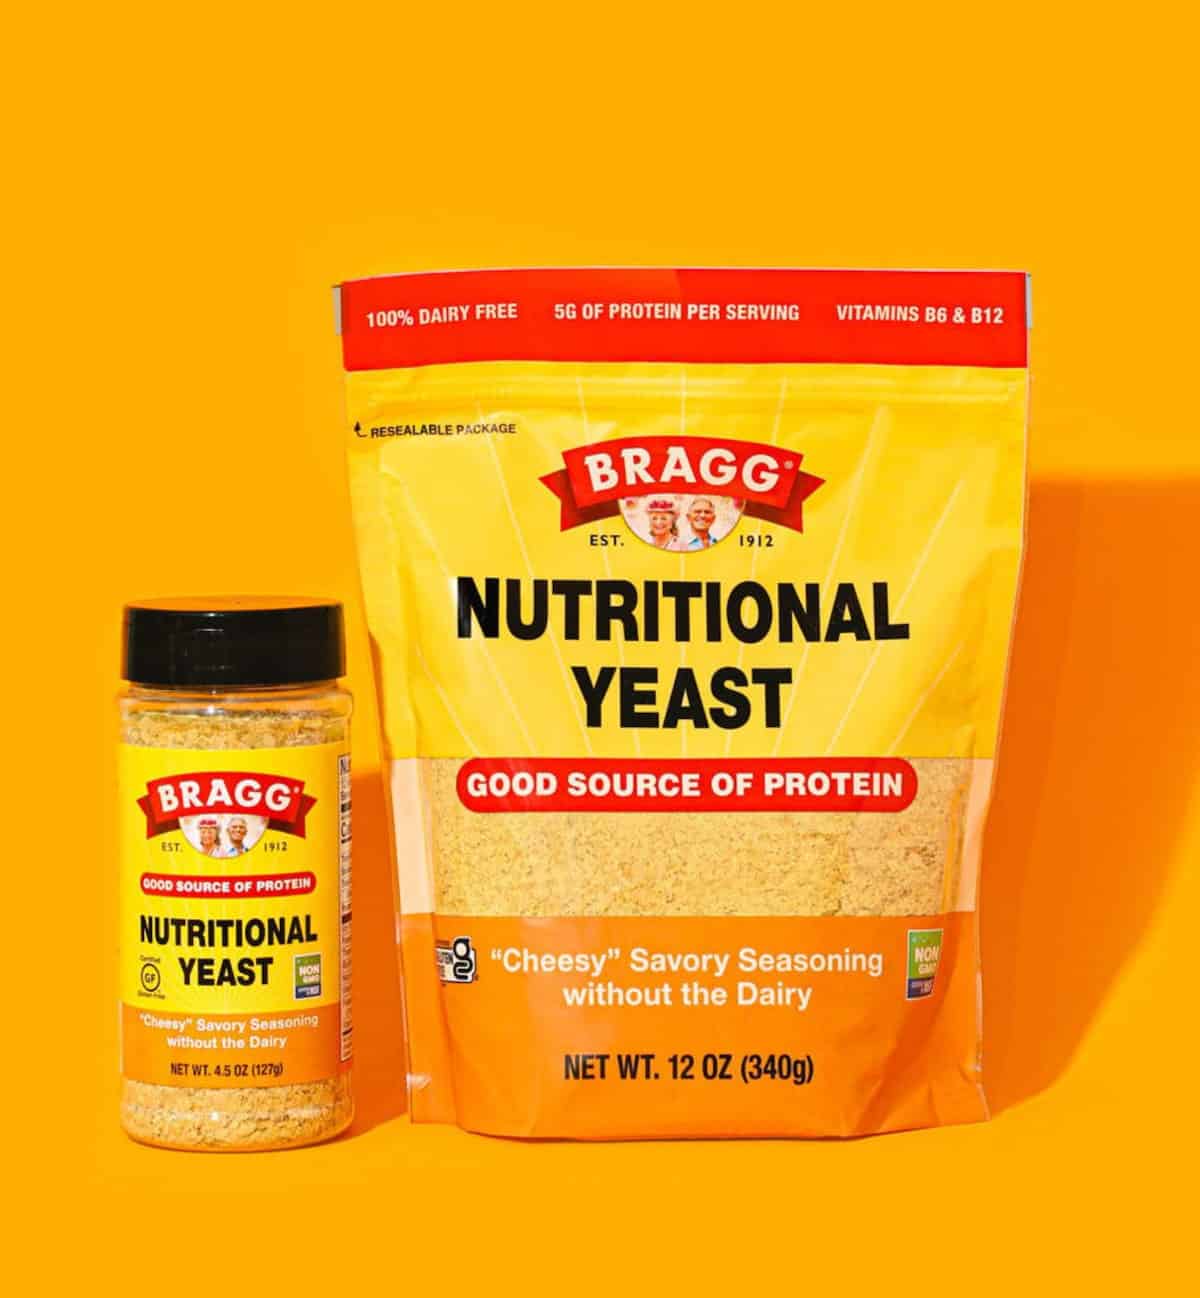 A bag and container of Bragg nutritional yeast.